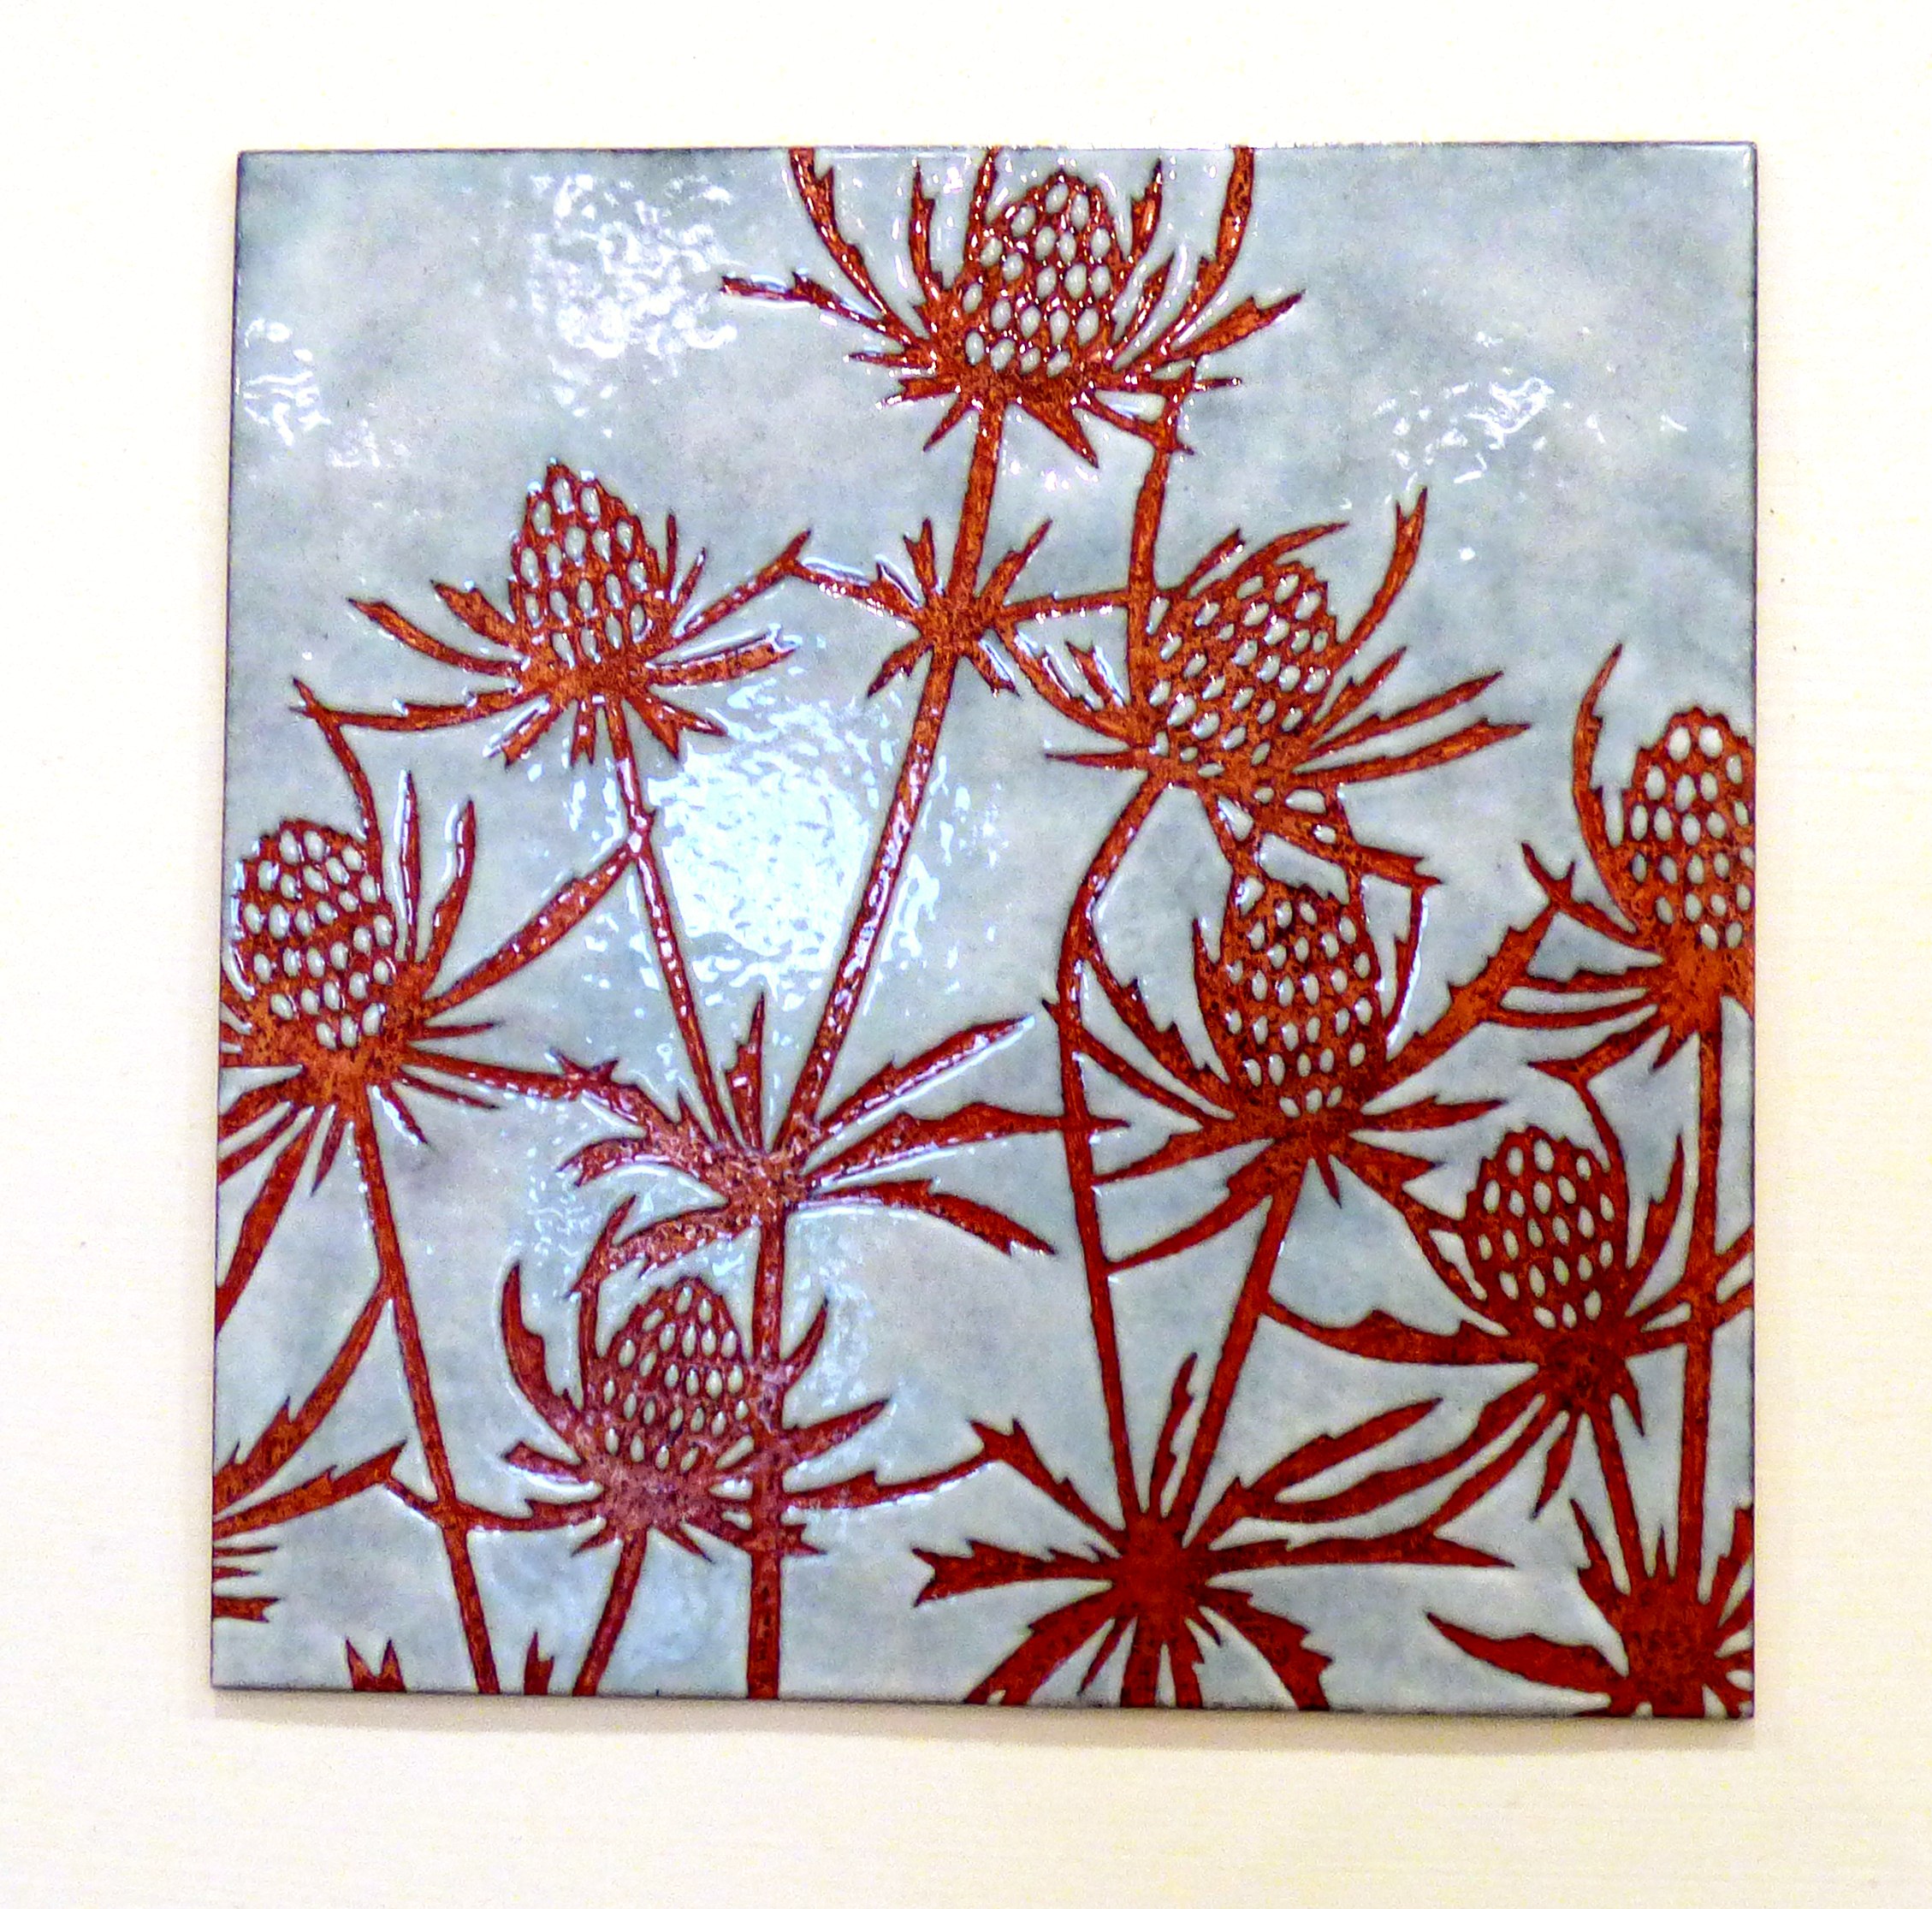 ENAMELLED PANEL 1 by Janine Partington, CRAFTED exhibitioin, Kirkby Gallery, 2016